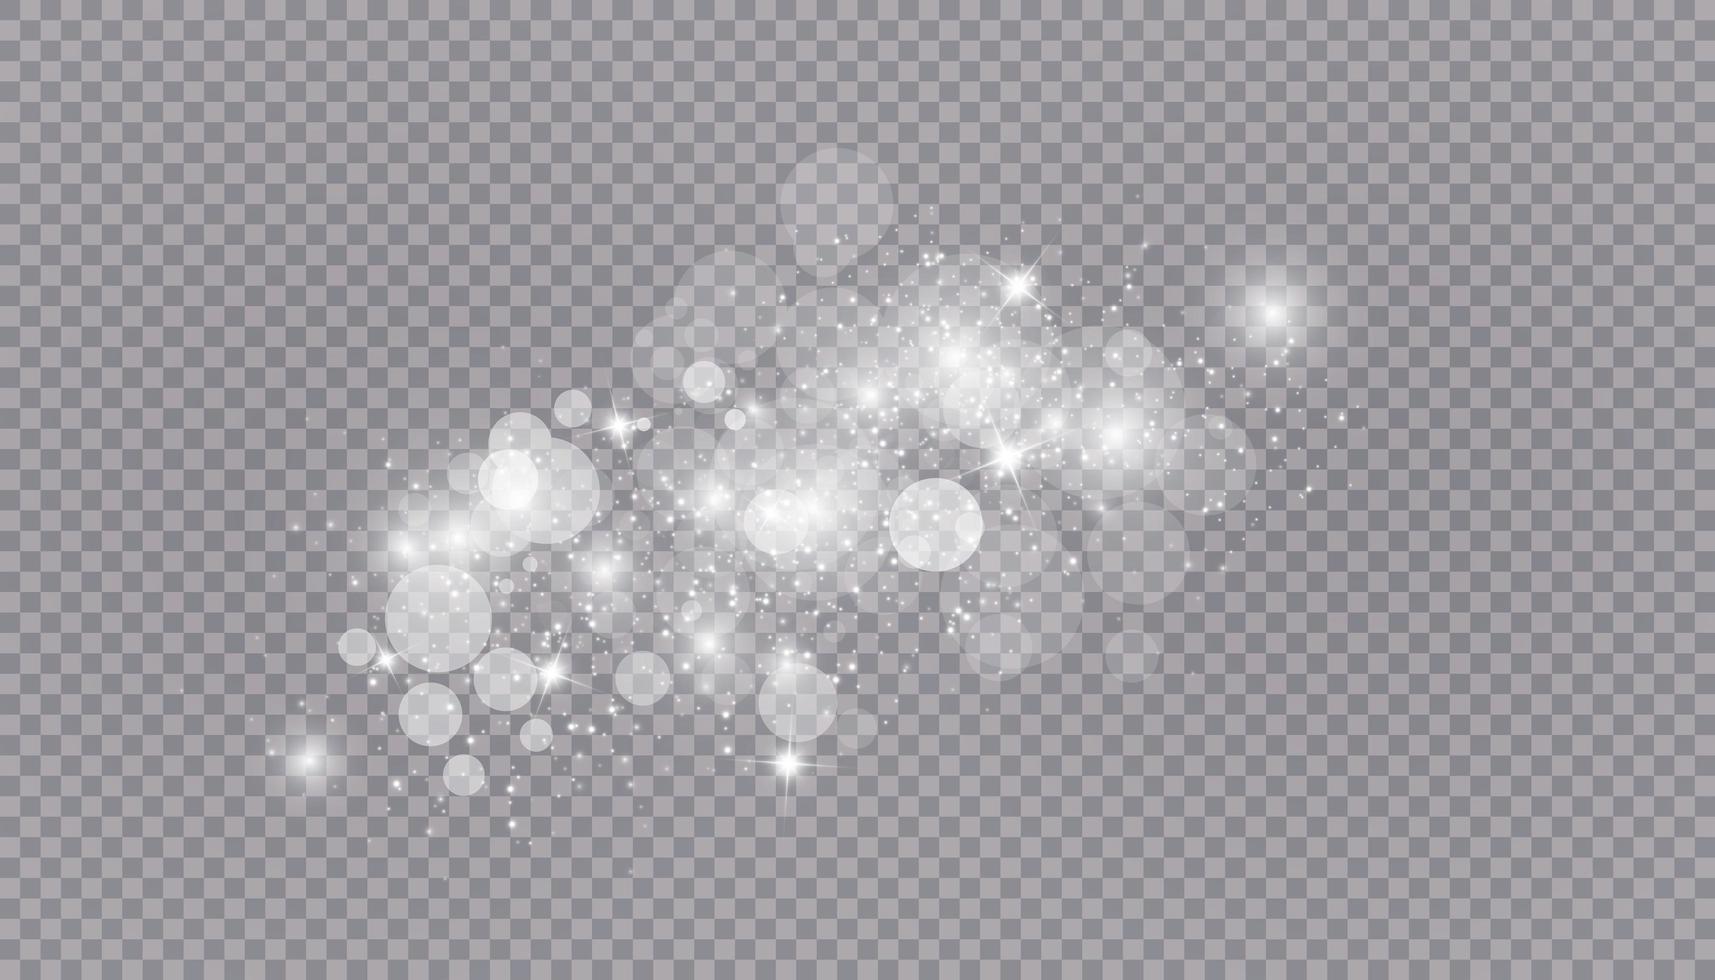 Glowing light effect with many glitter particles isolated vector